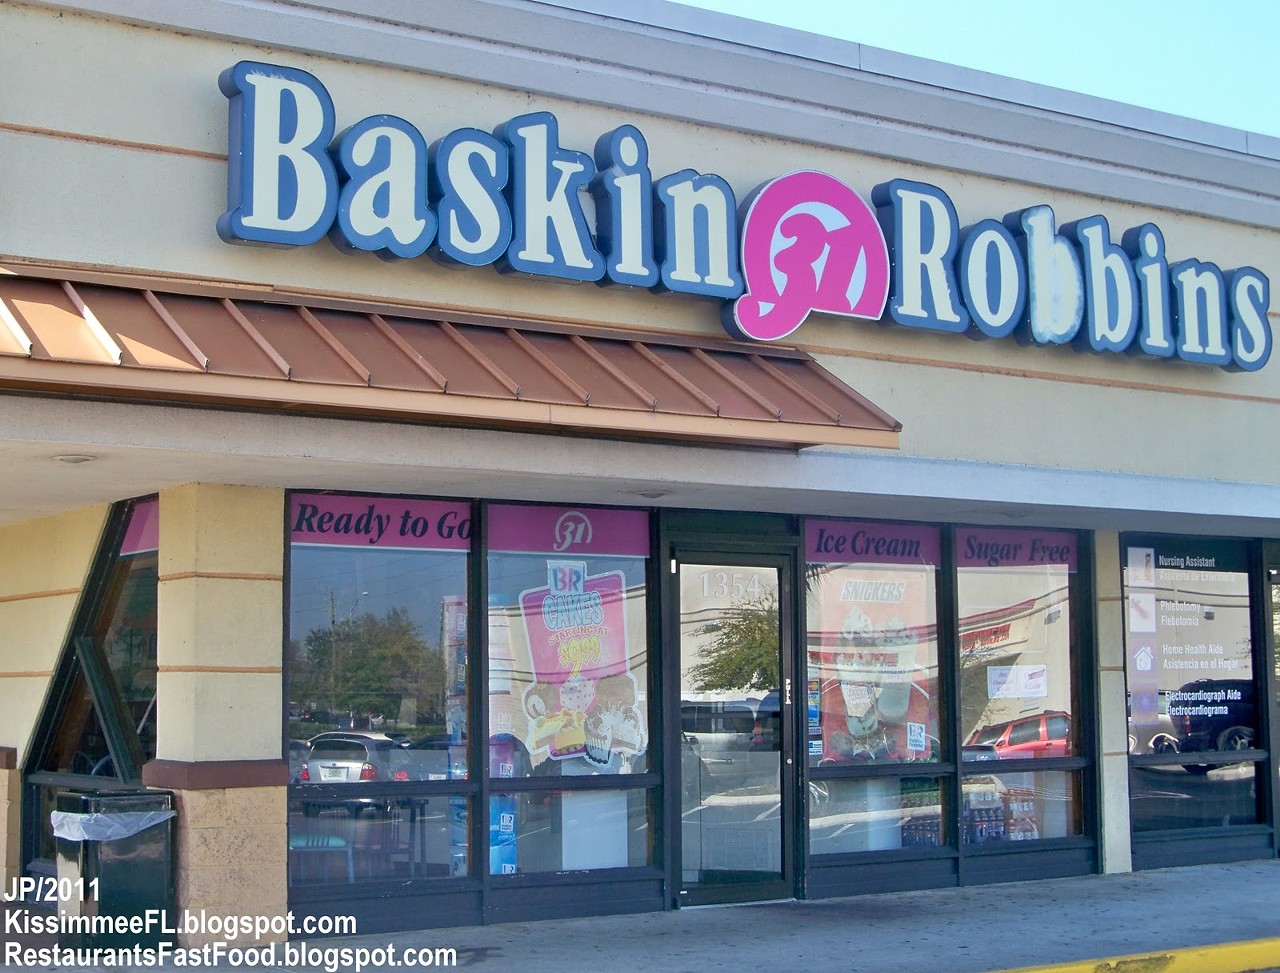 Sign up for the birthday club and get free ice cream at Baskin Robbins.